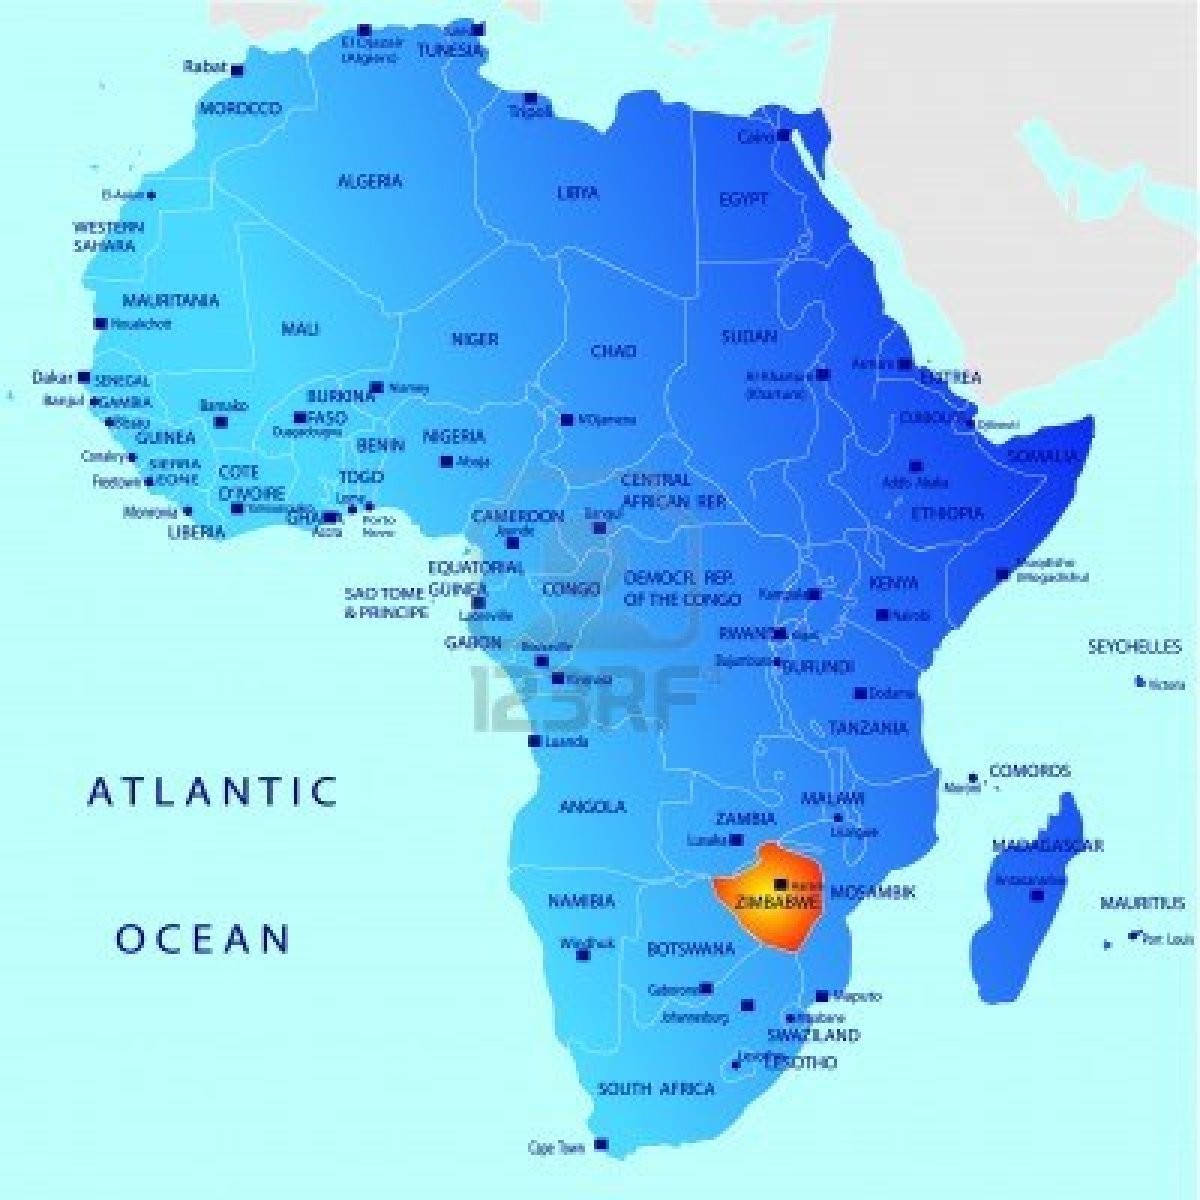 african-map-highlighting-zimbabwe-as-one-of-the-major-tourist-destinations